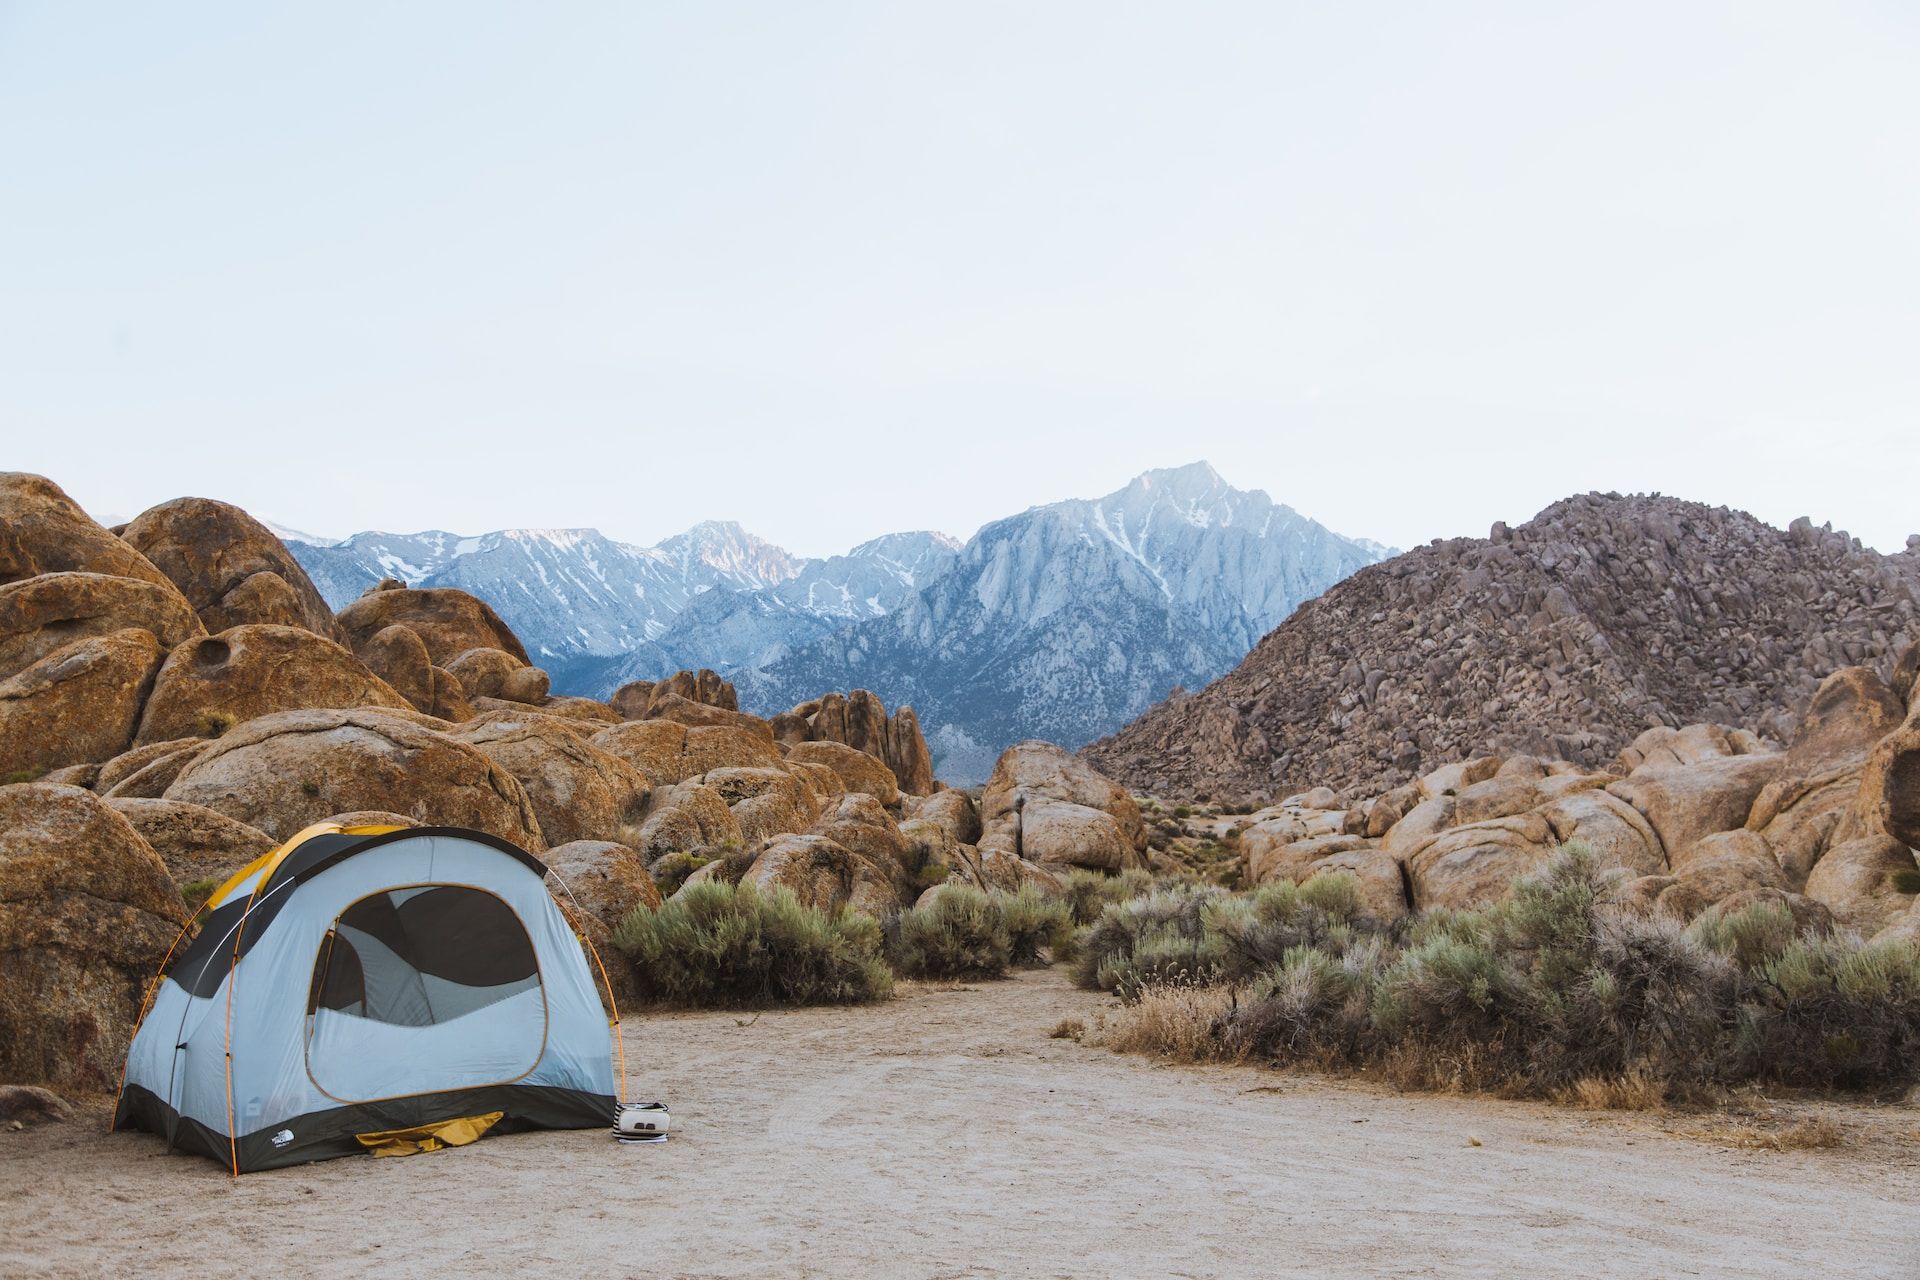 A tent in the Alabama Hills, Lone Pine